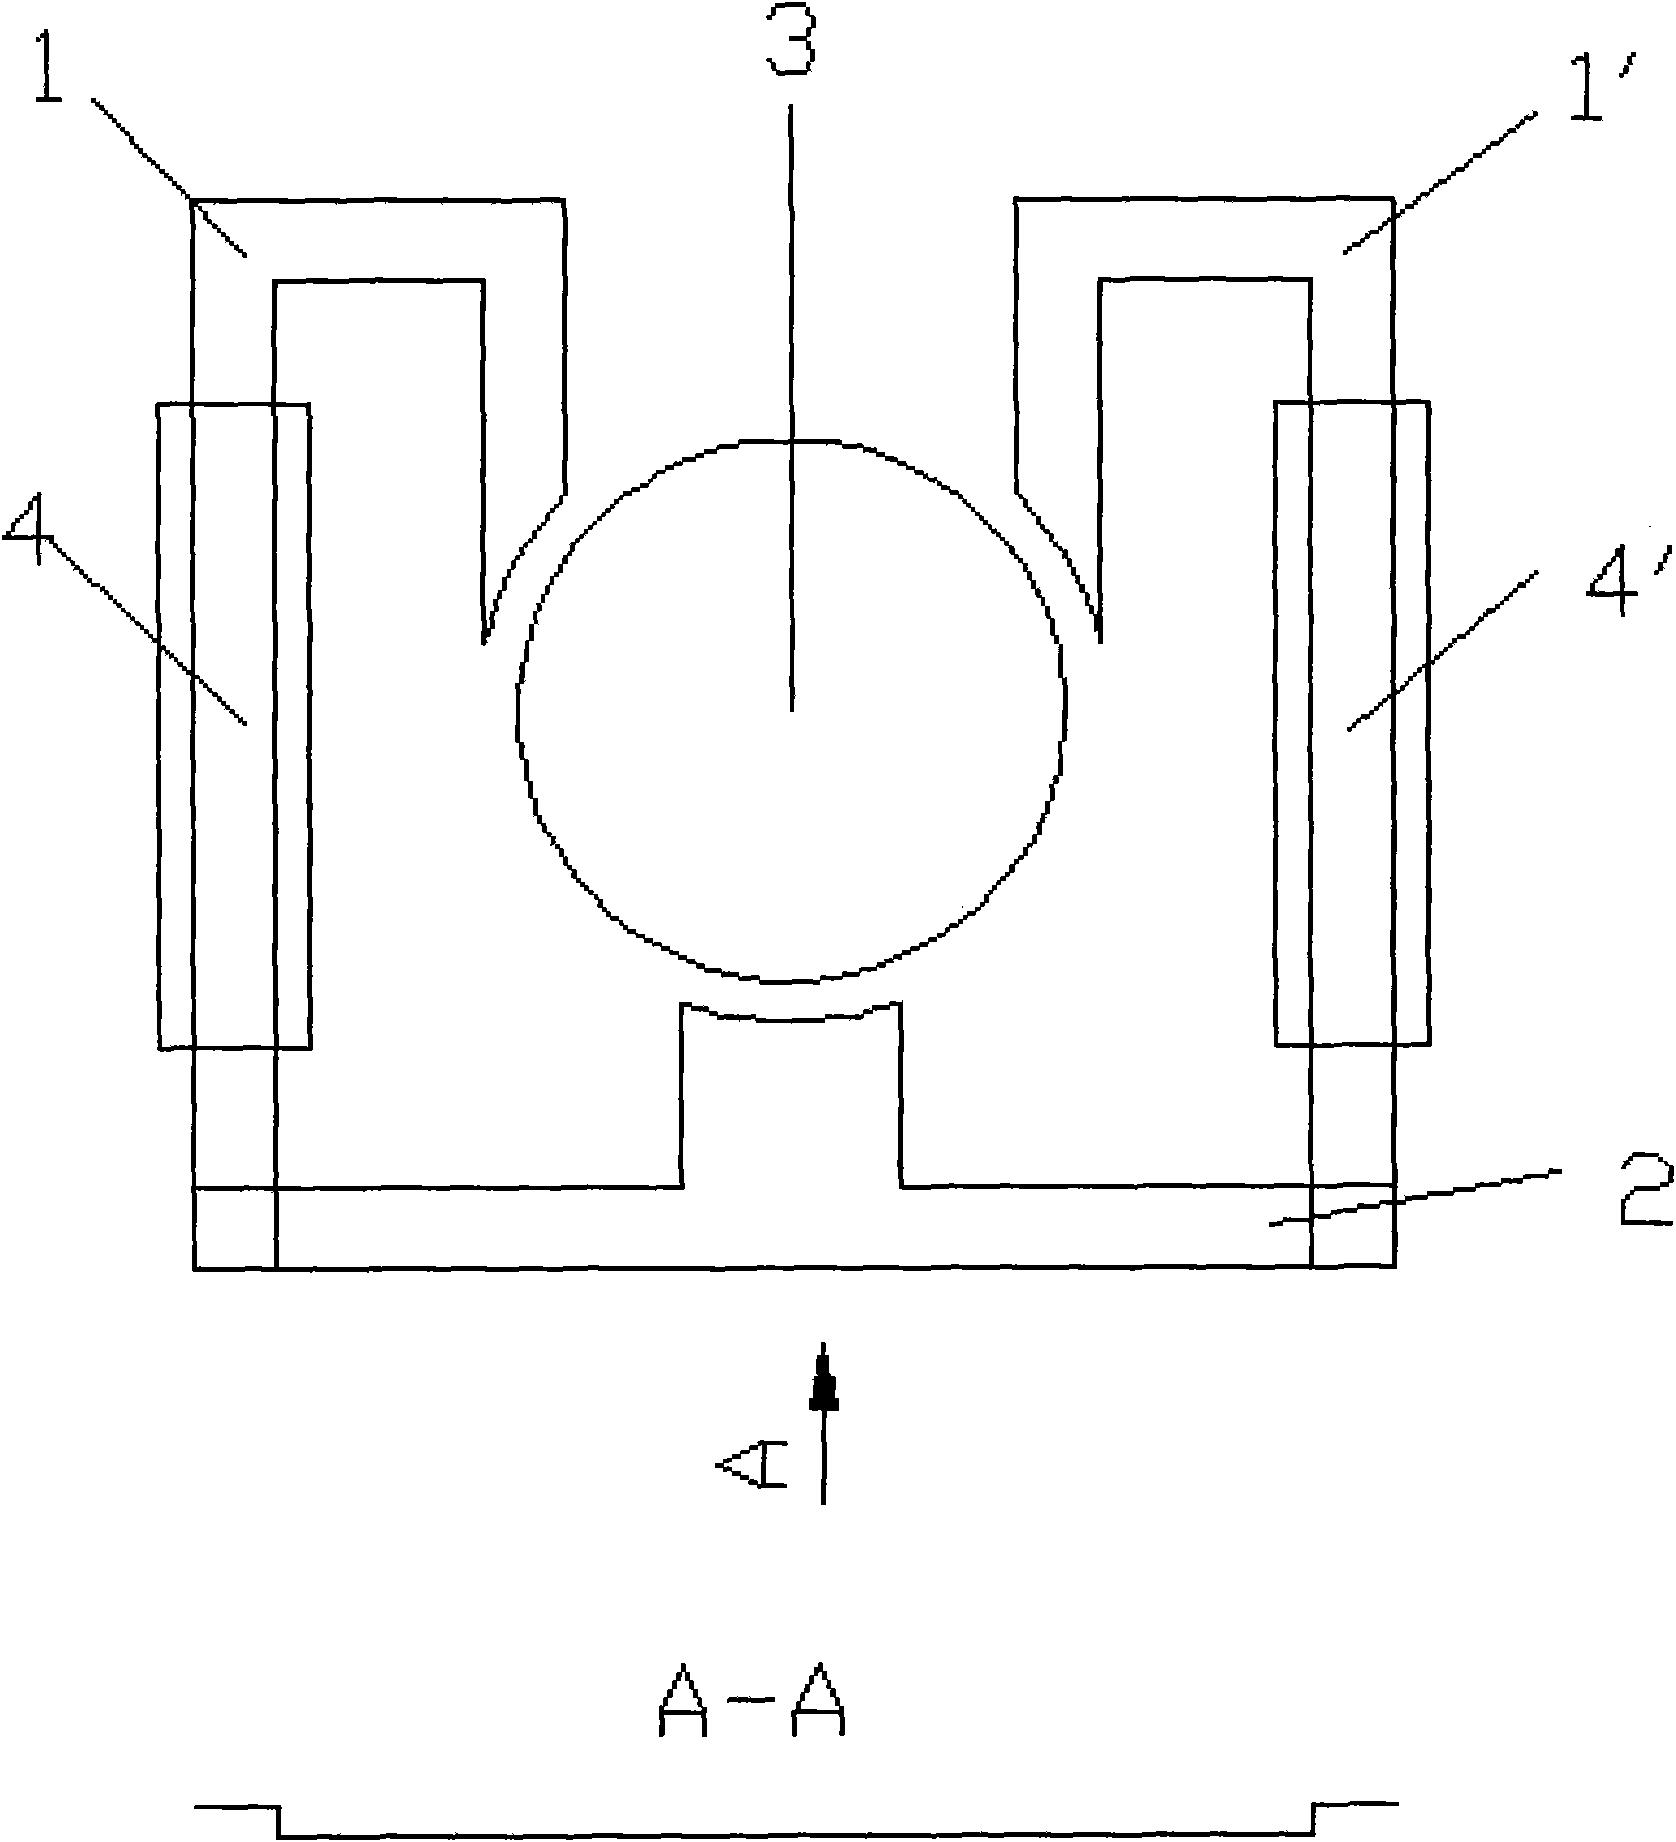 Instrument step motor with large rotor and low speed ratio